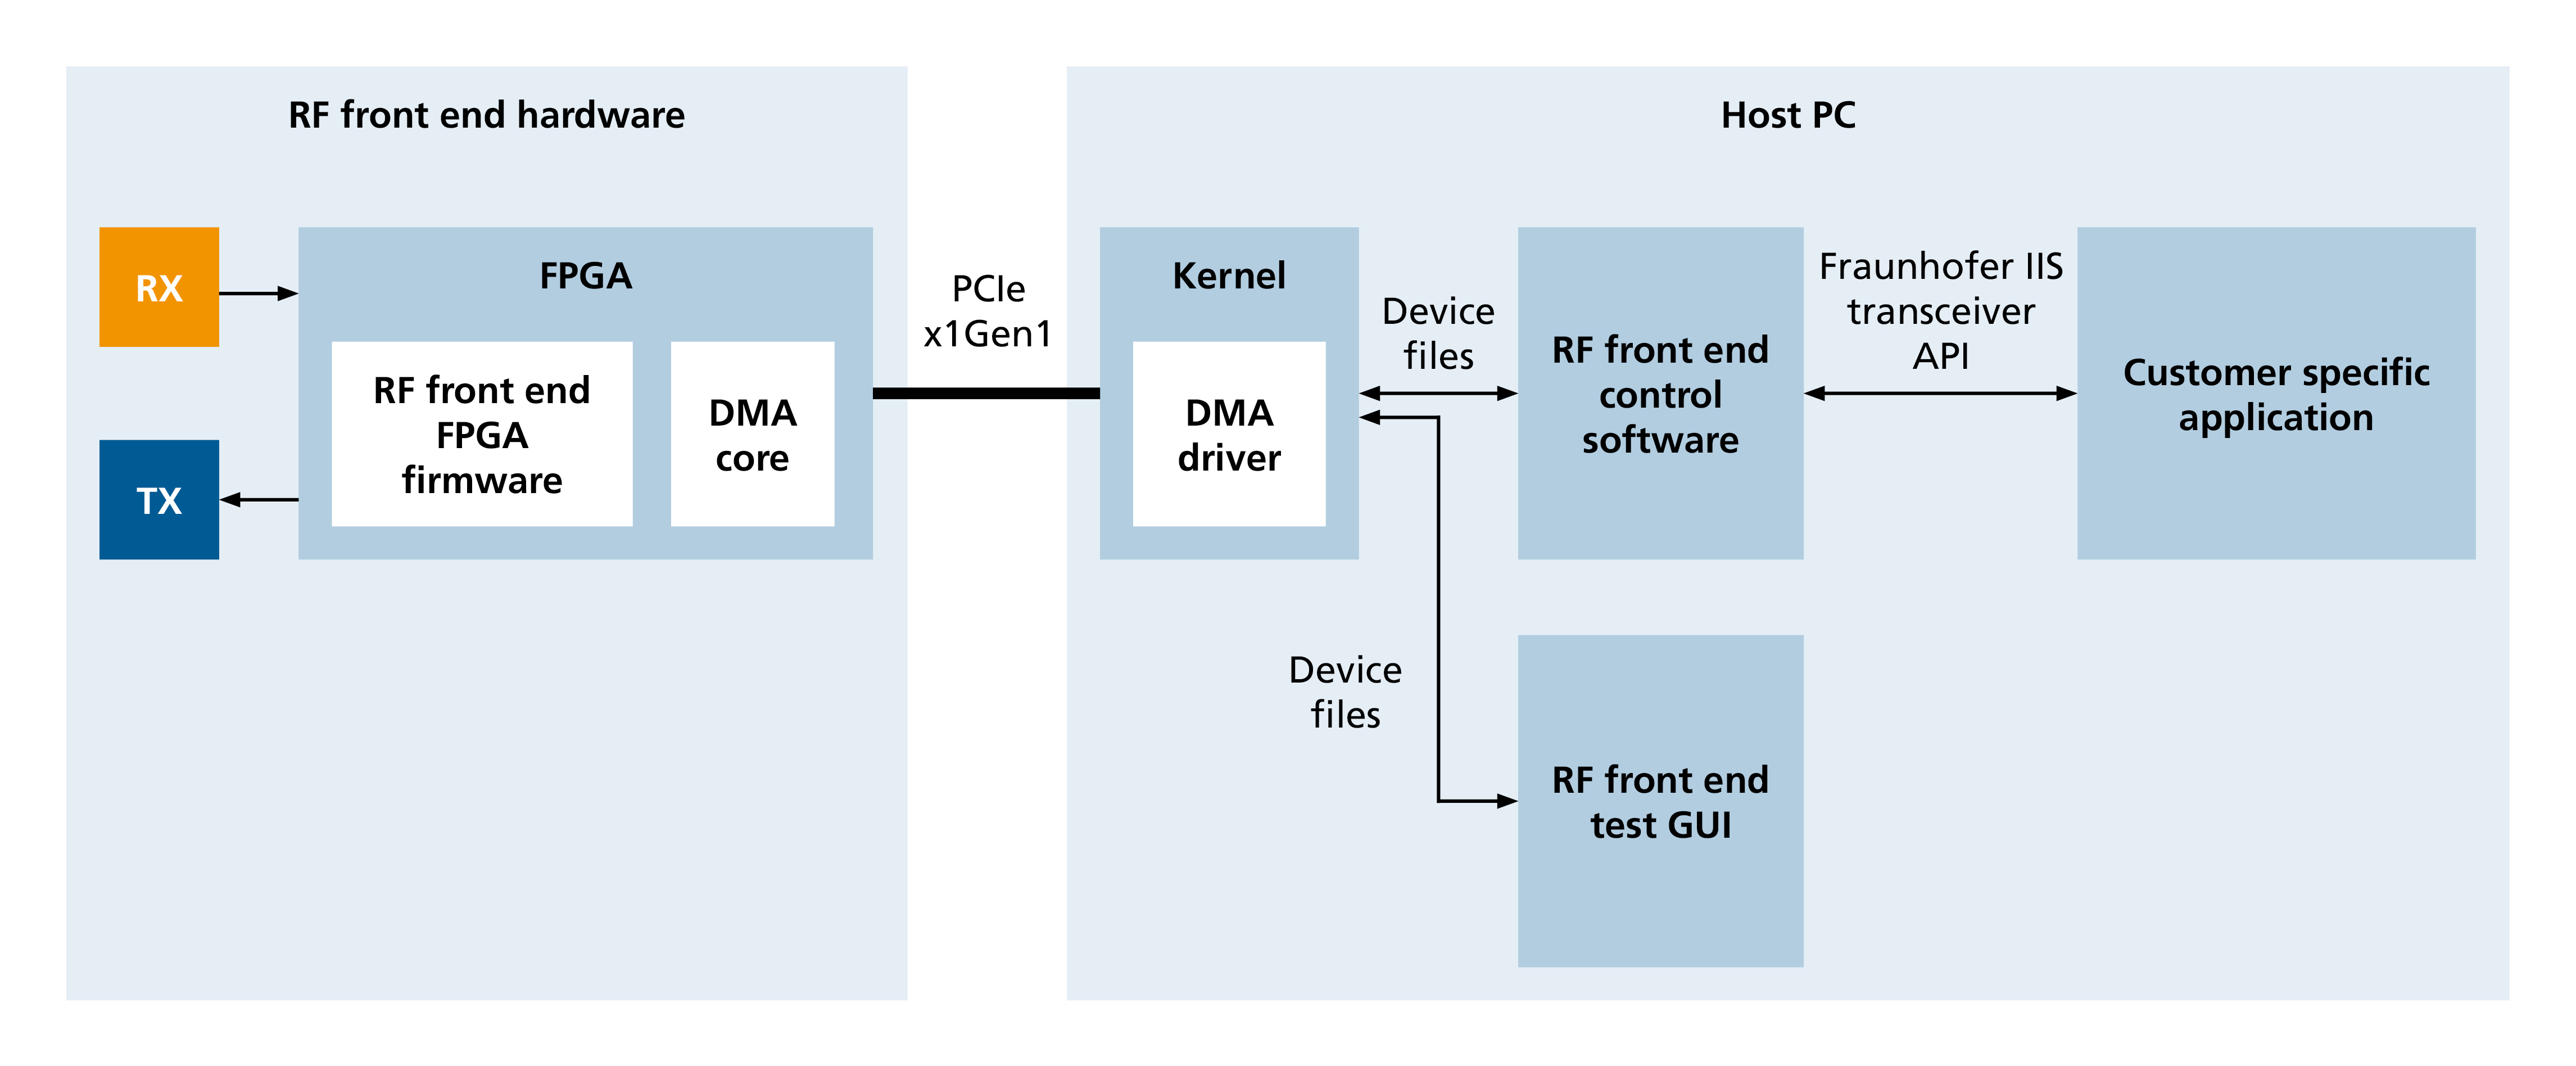 Firmware, hardware and software components of the RF front end 